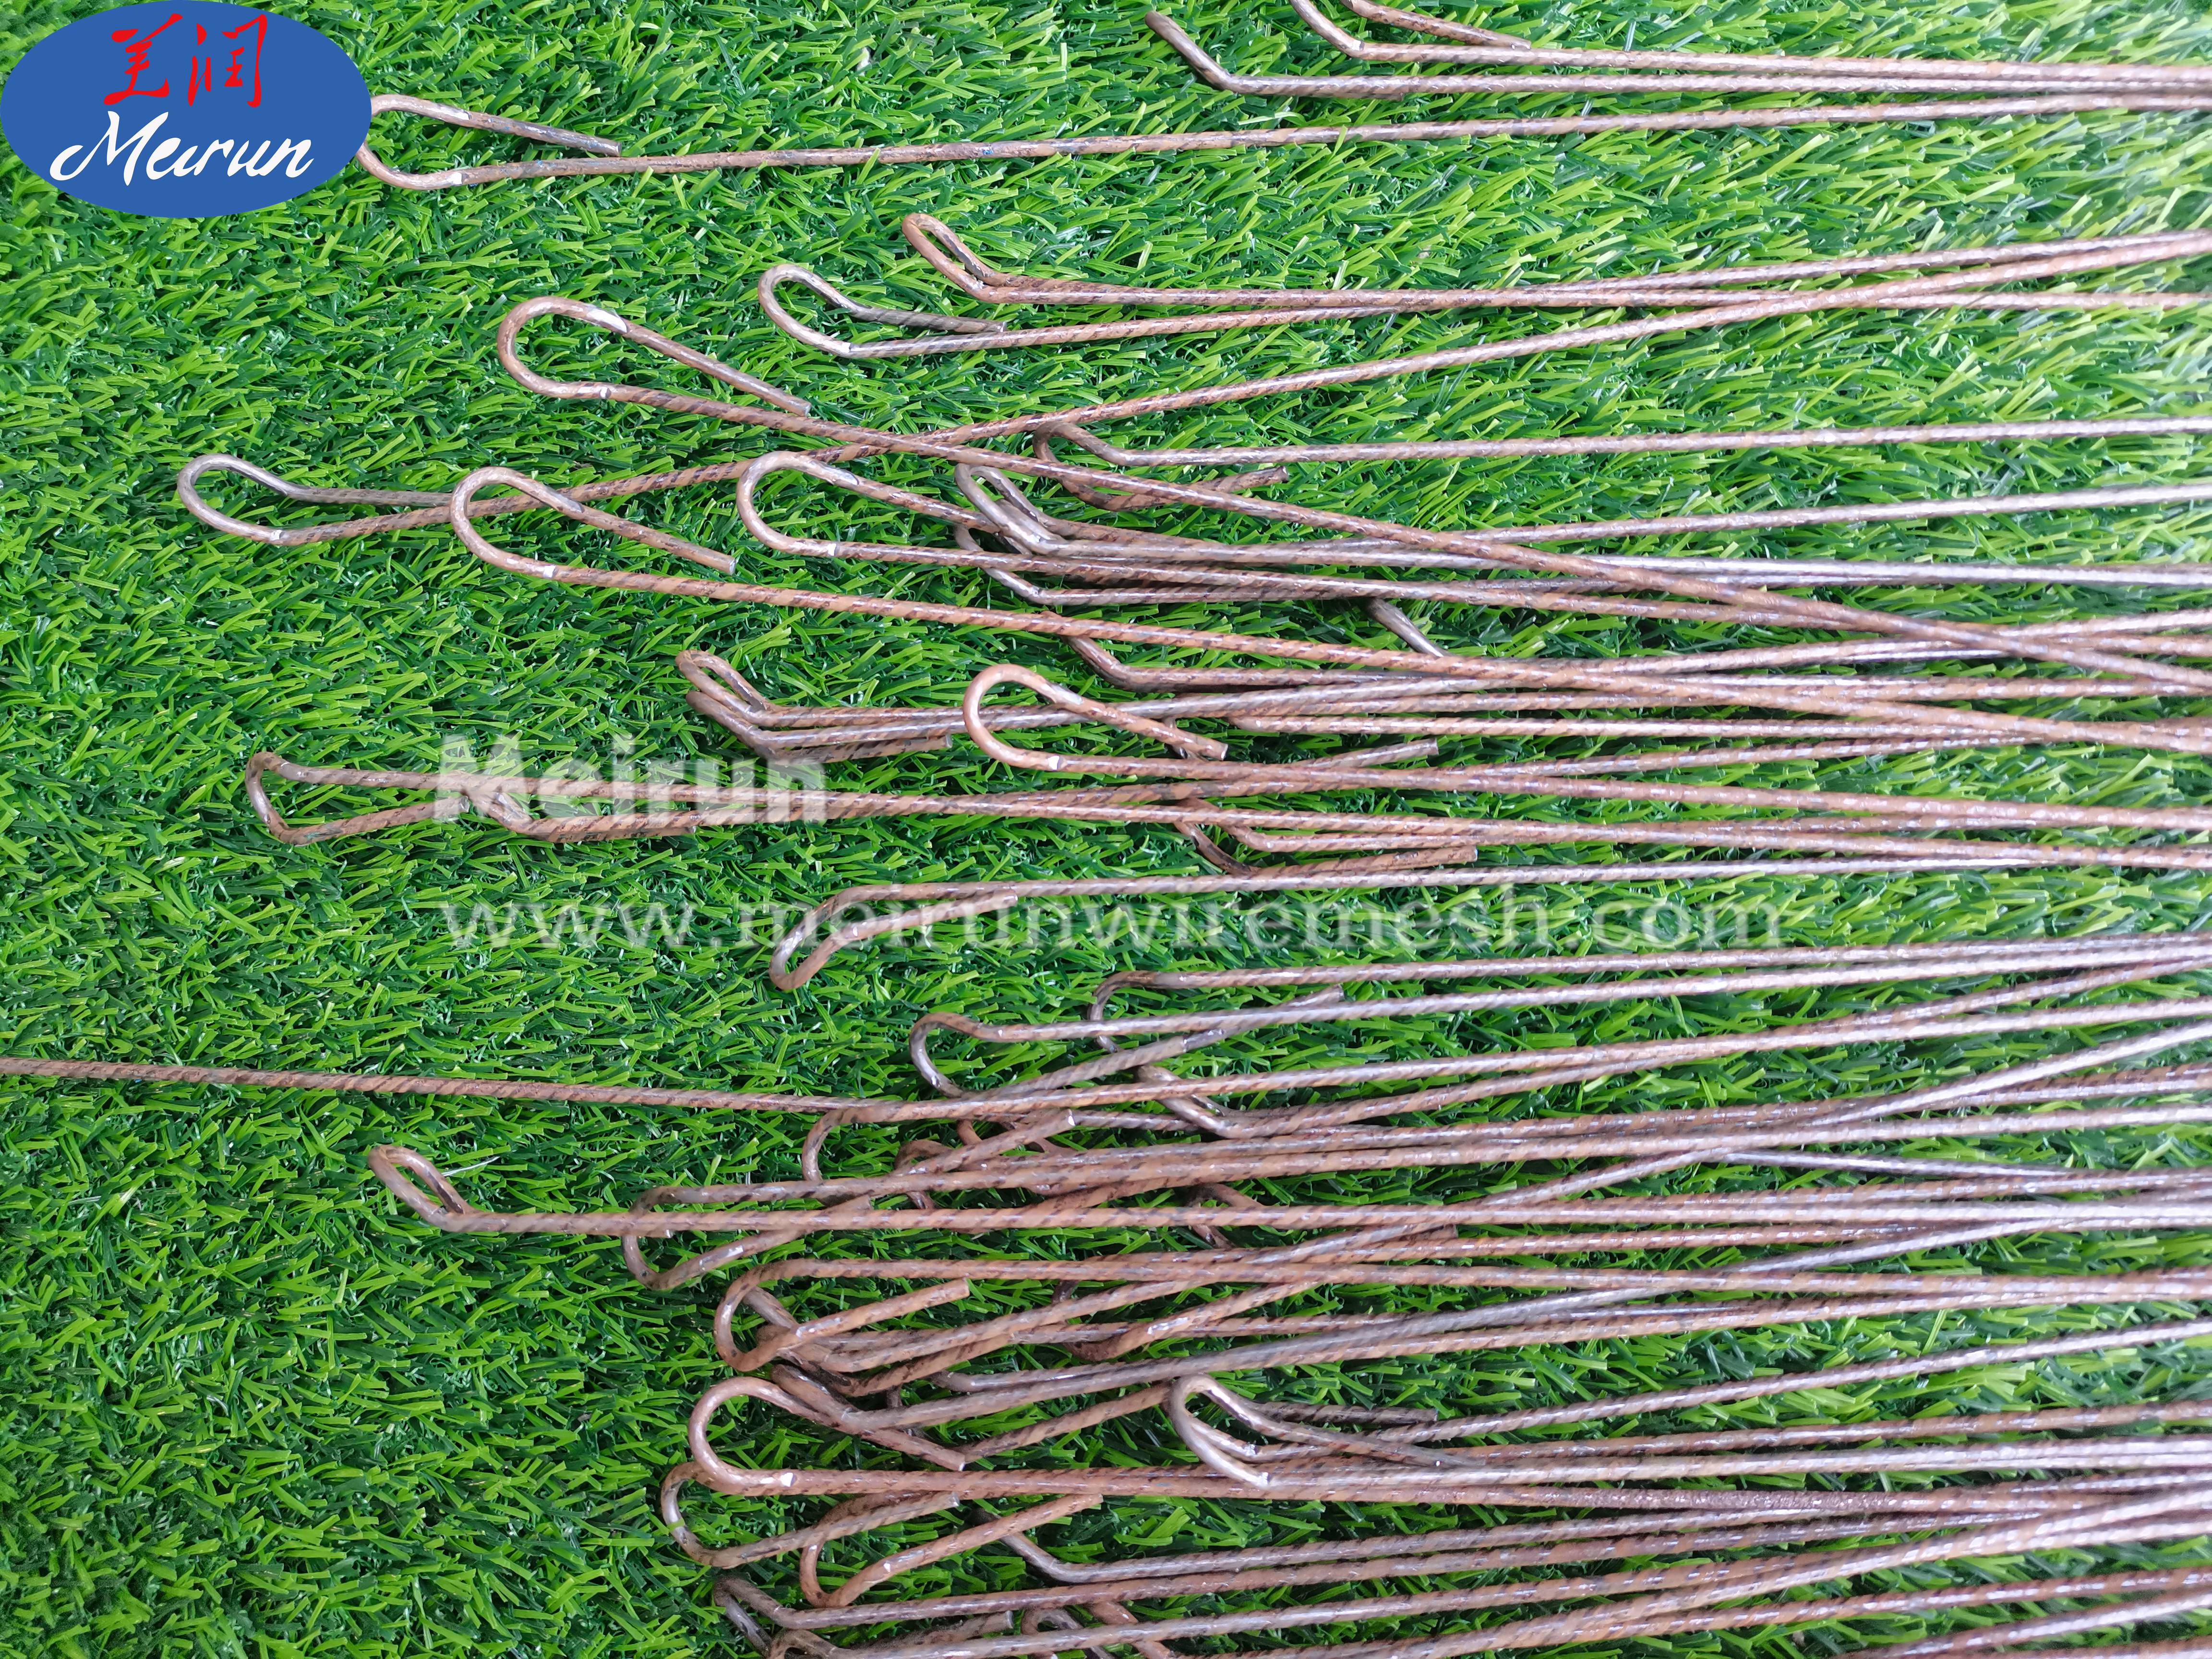 Galvanized Double Loop Bale Ties / Quick Link Cotton Packing Wire/Double Loops/Bale Tie Machine